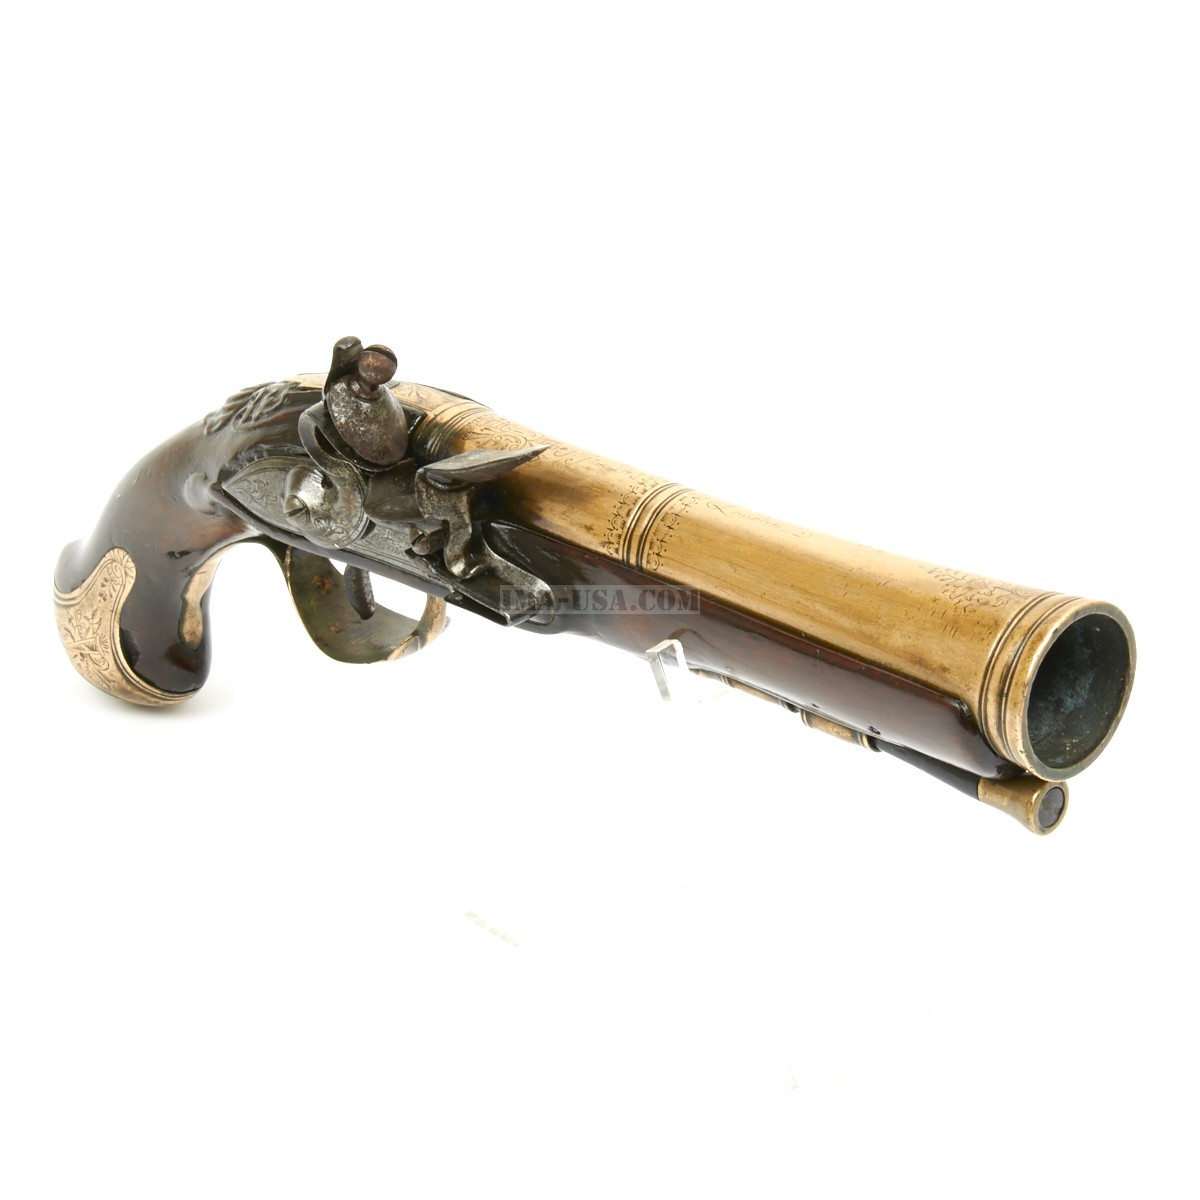 Images of Blunderbuss  | 1200x1200